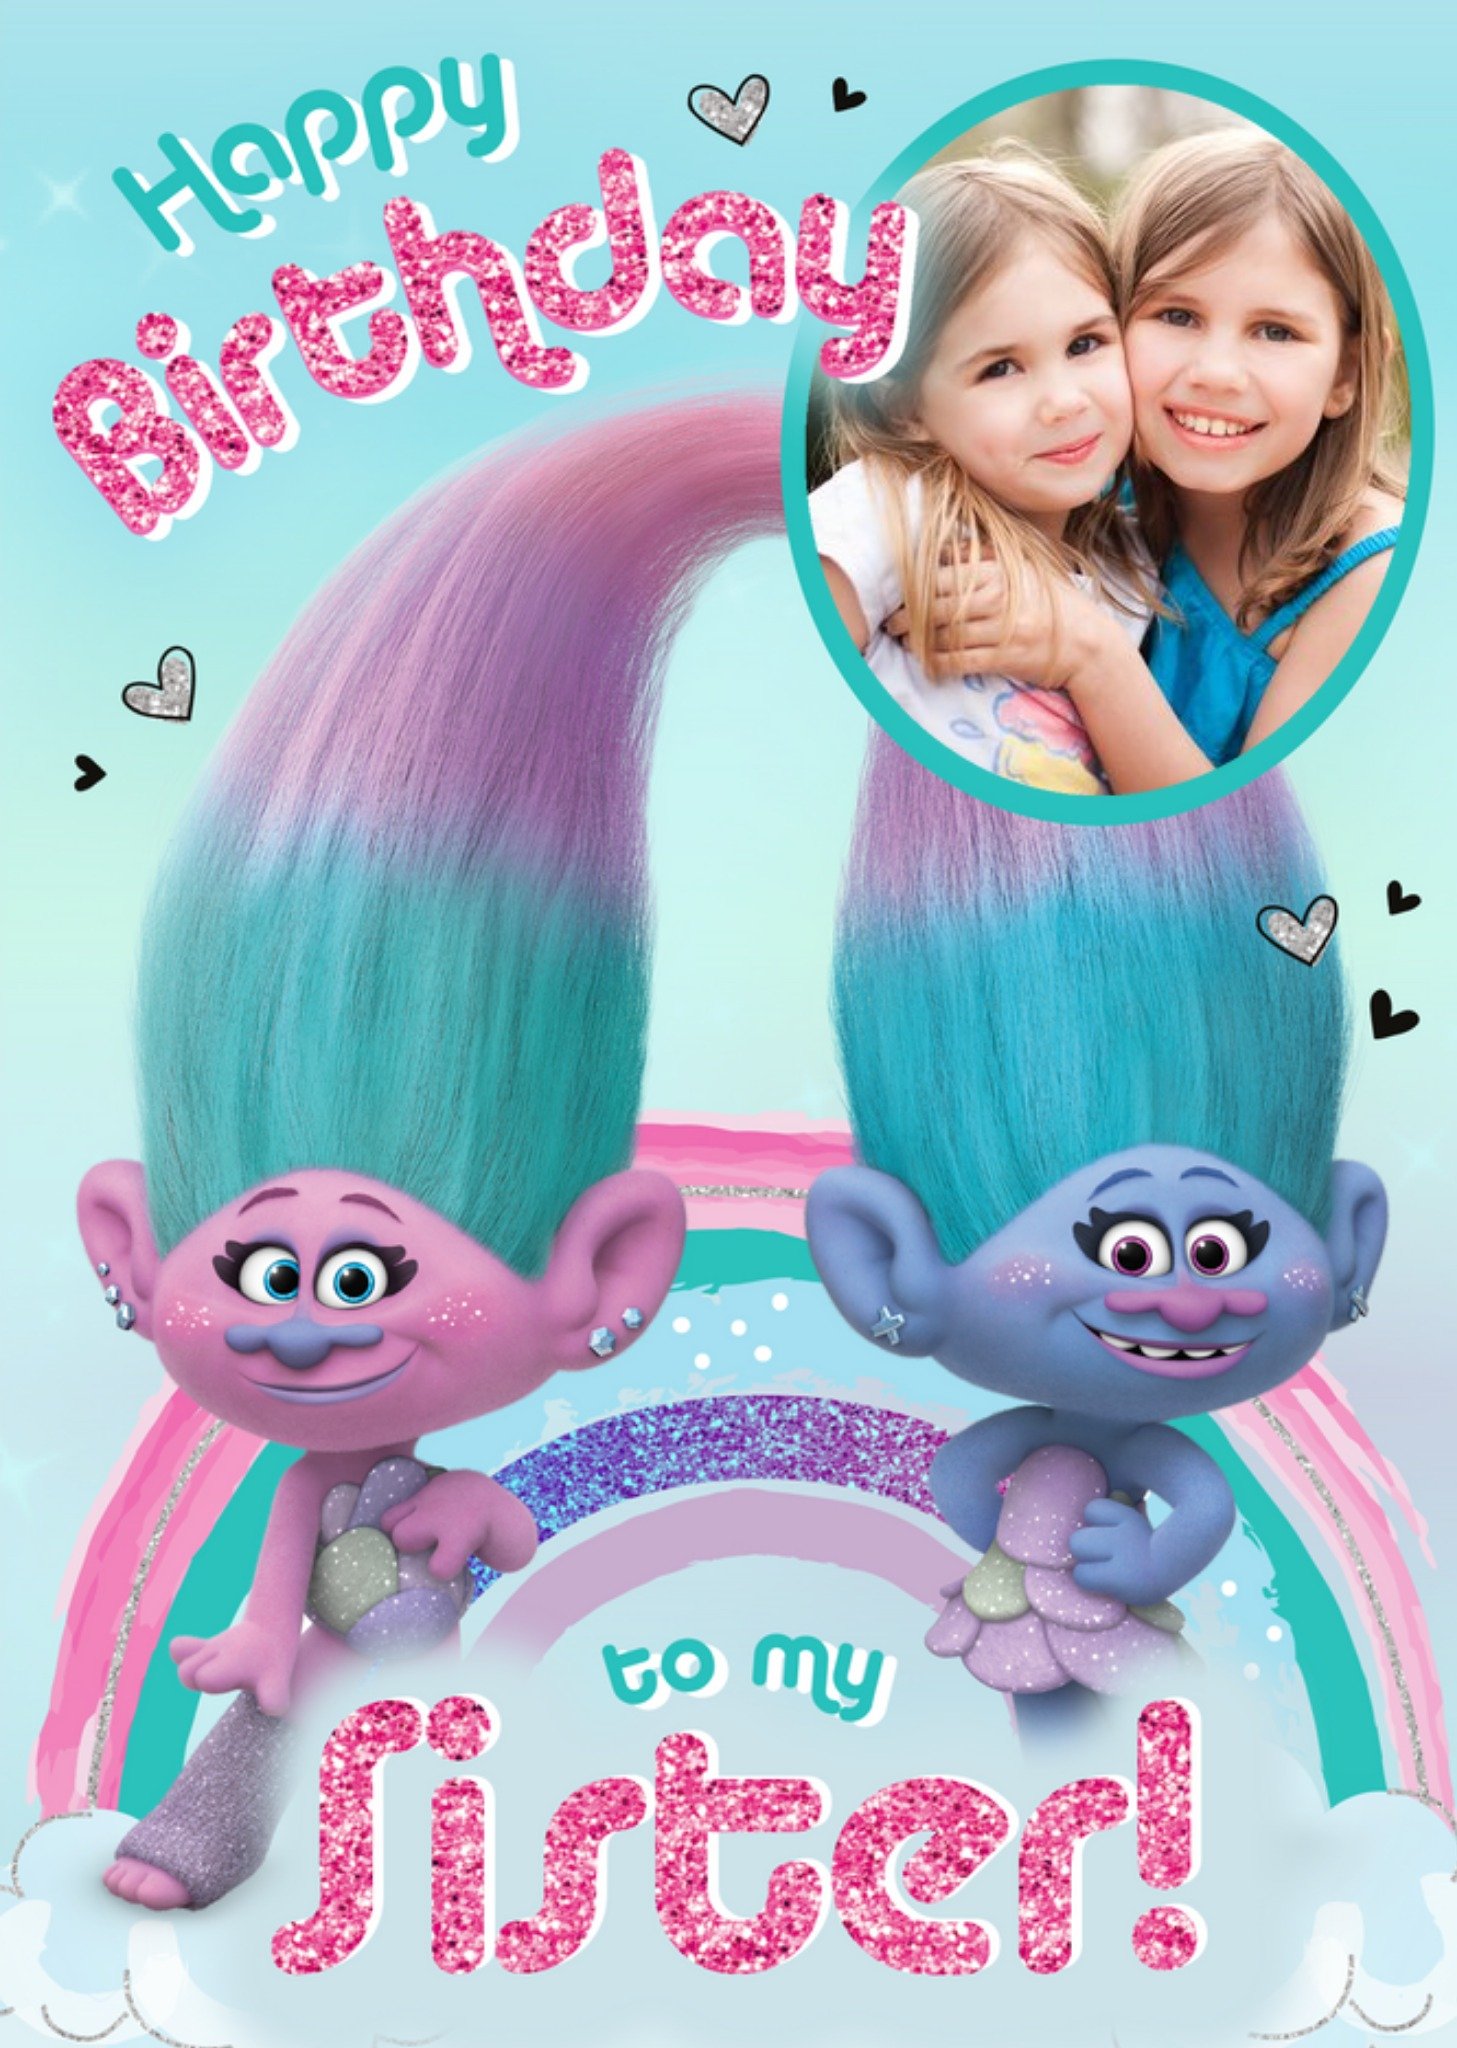 Birthday Card - Sister - Trolls - Satin And Chenille - Photo Upload Card, Large